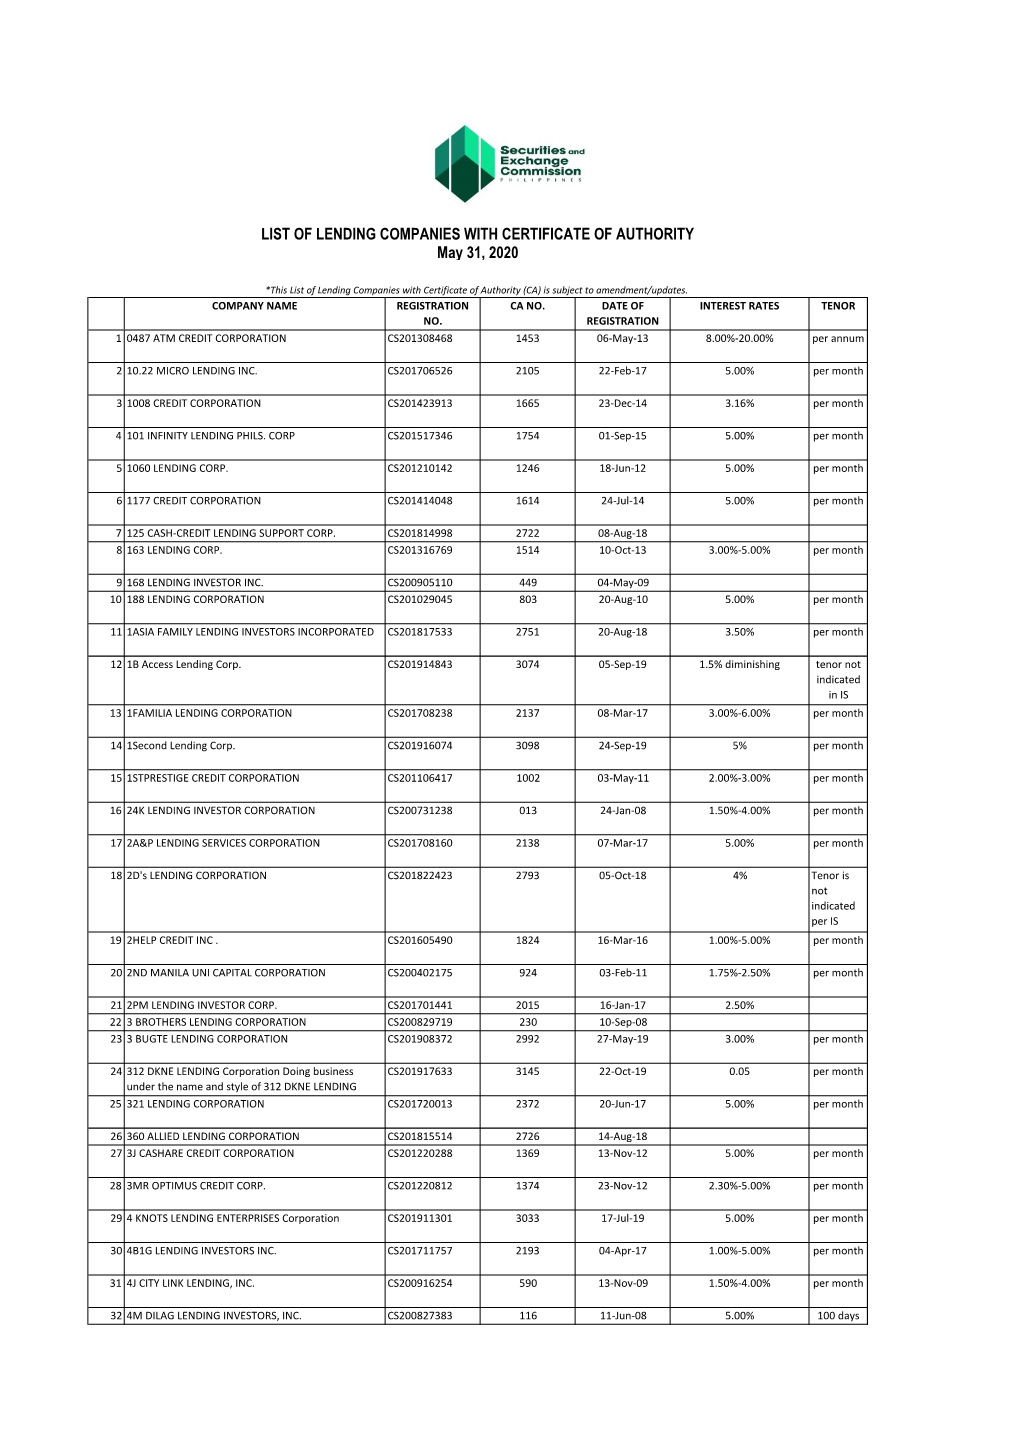 LIST of LENDING COMPANIES with CERTIFICATE of AUTHORITY May 31, 2020